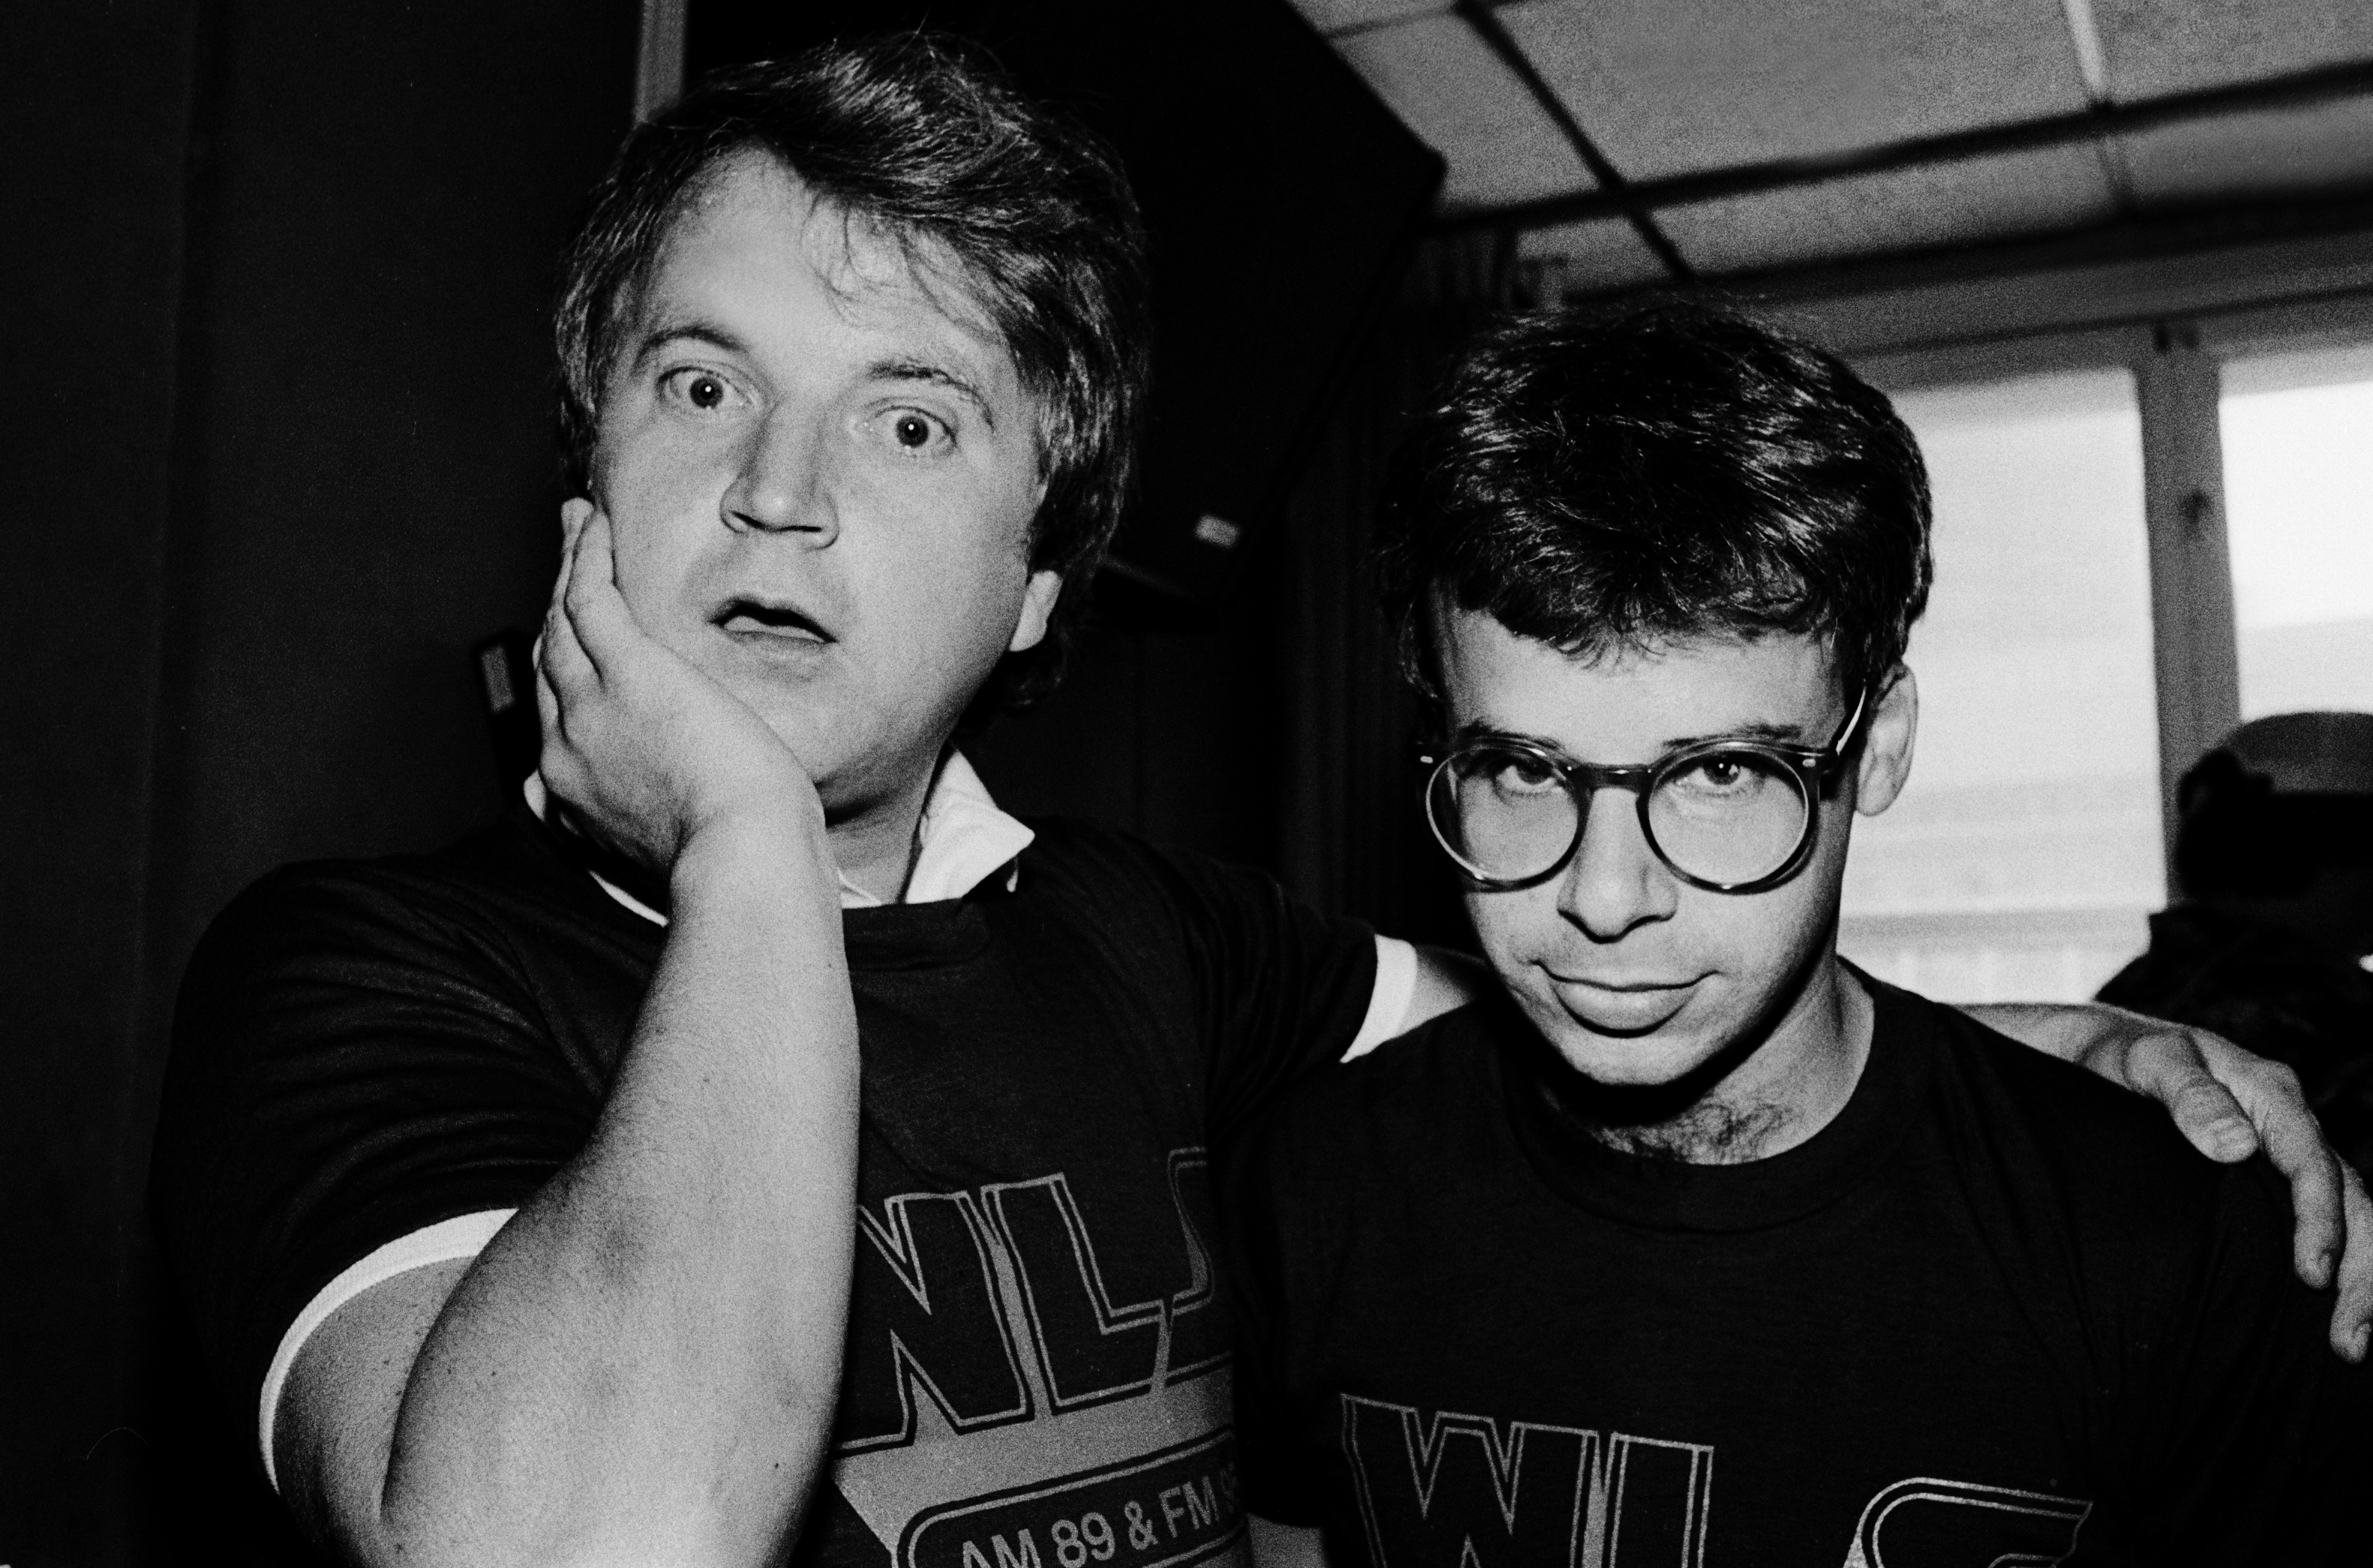 Dave Thomas and Rick Moranis at WLS Radio to promote their film "Strange Brew" in 1983 in Chicago | Source: Getty Images